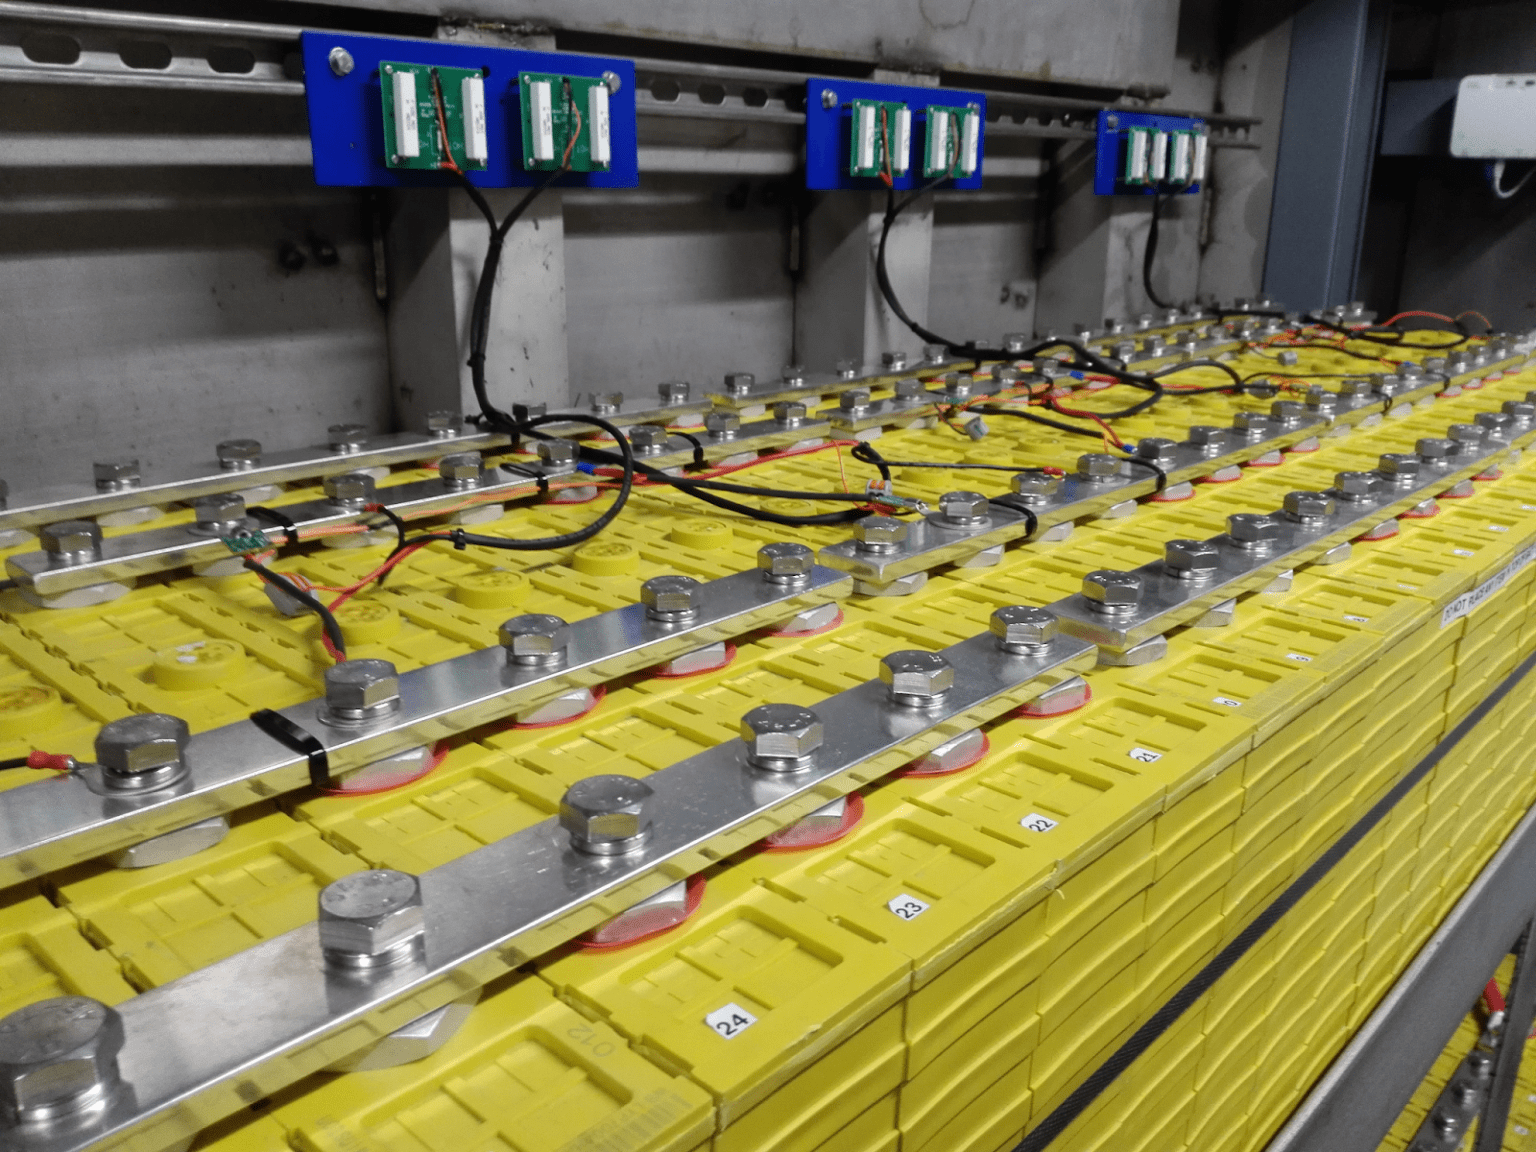 Things You Should Know About LFP Batteries